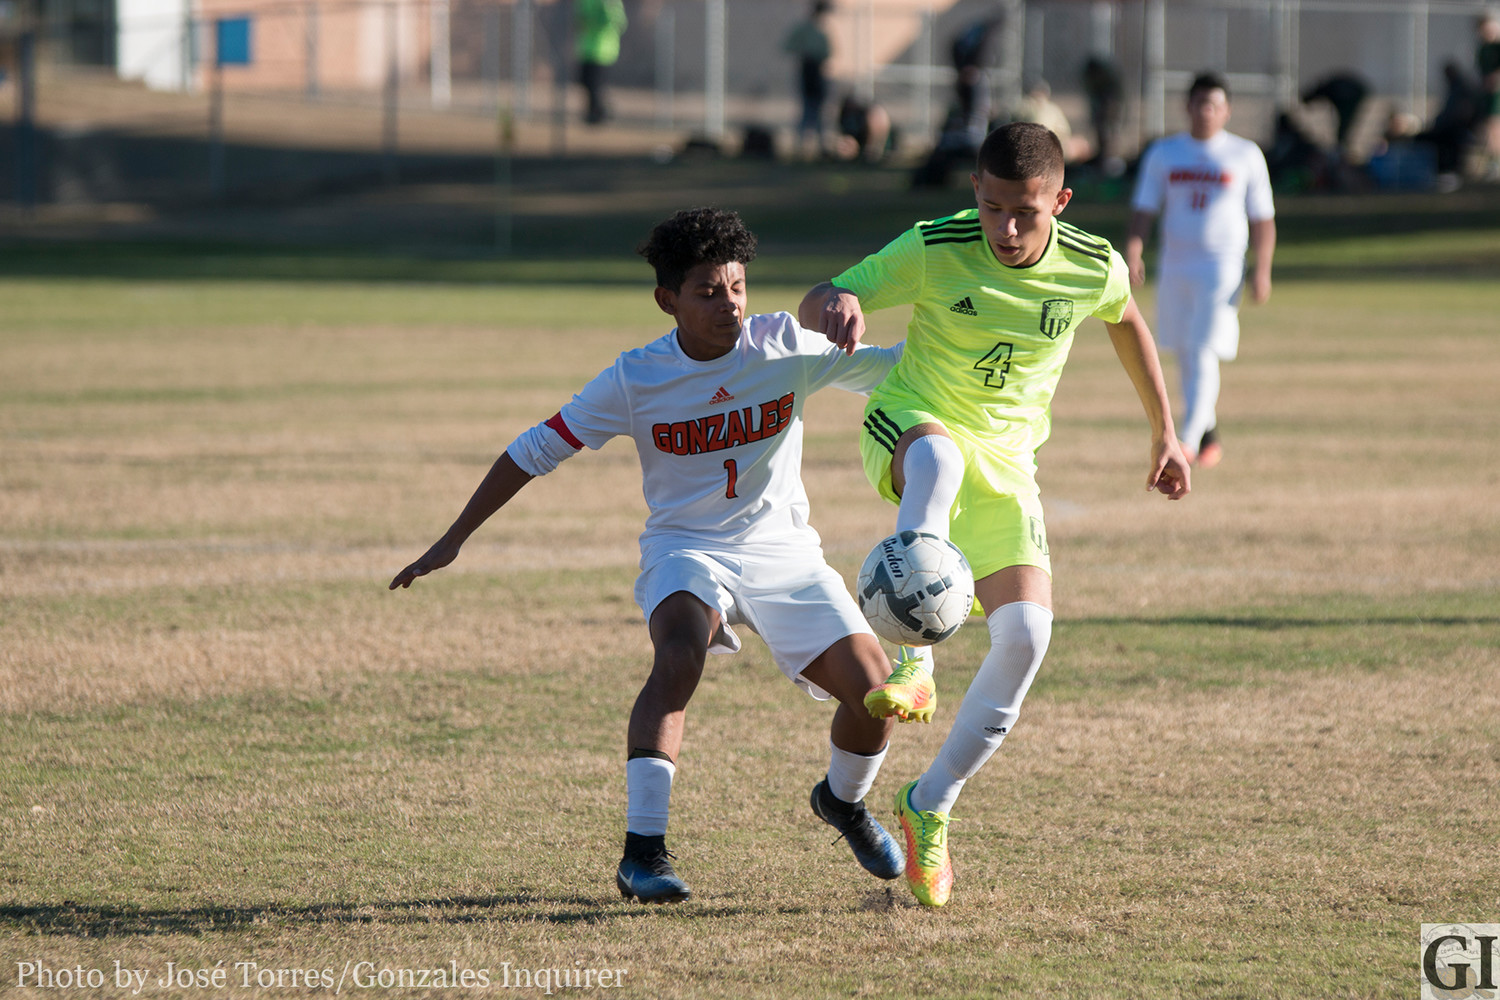 Anthony Veliz (1) was active in the tournament, scoring five of the team’s 12 goals as the Apaches won one game and lost two last weekend in Pleasanton.